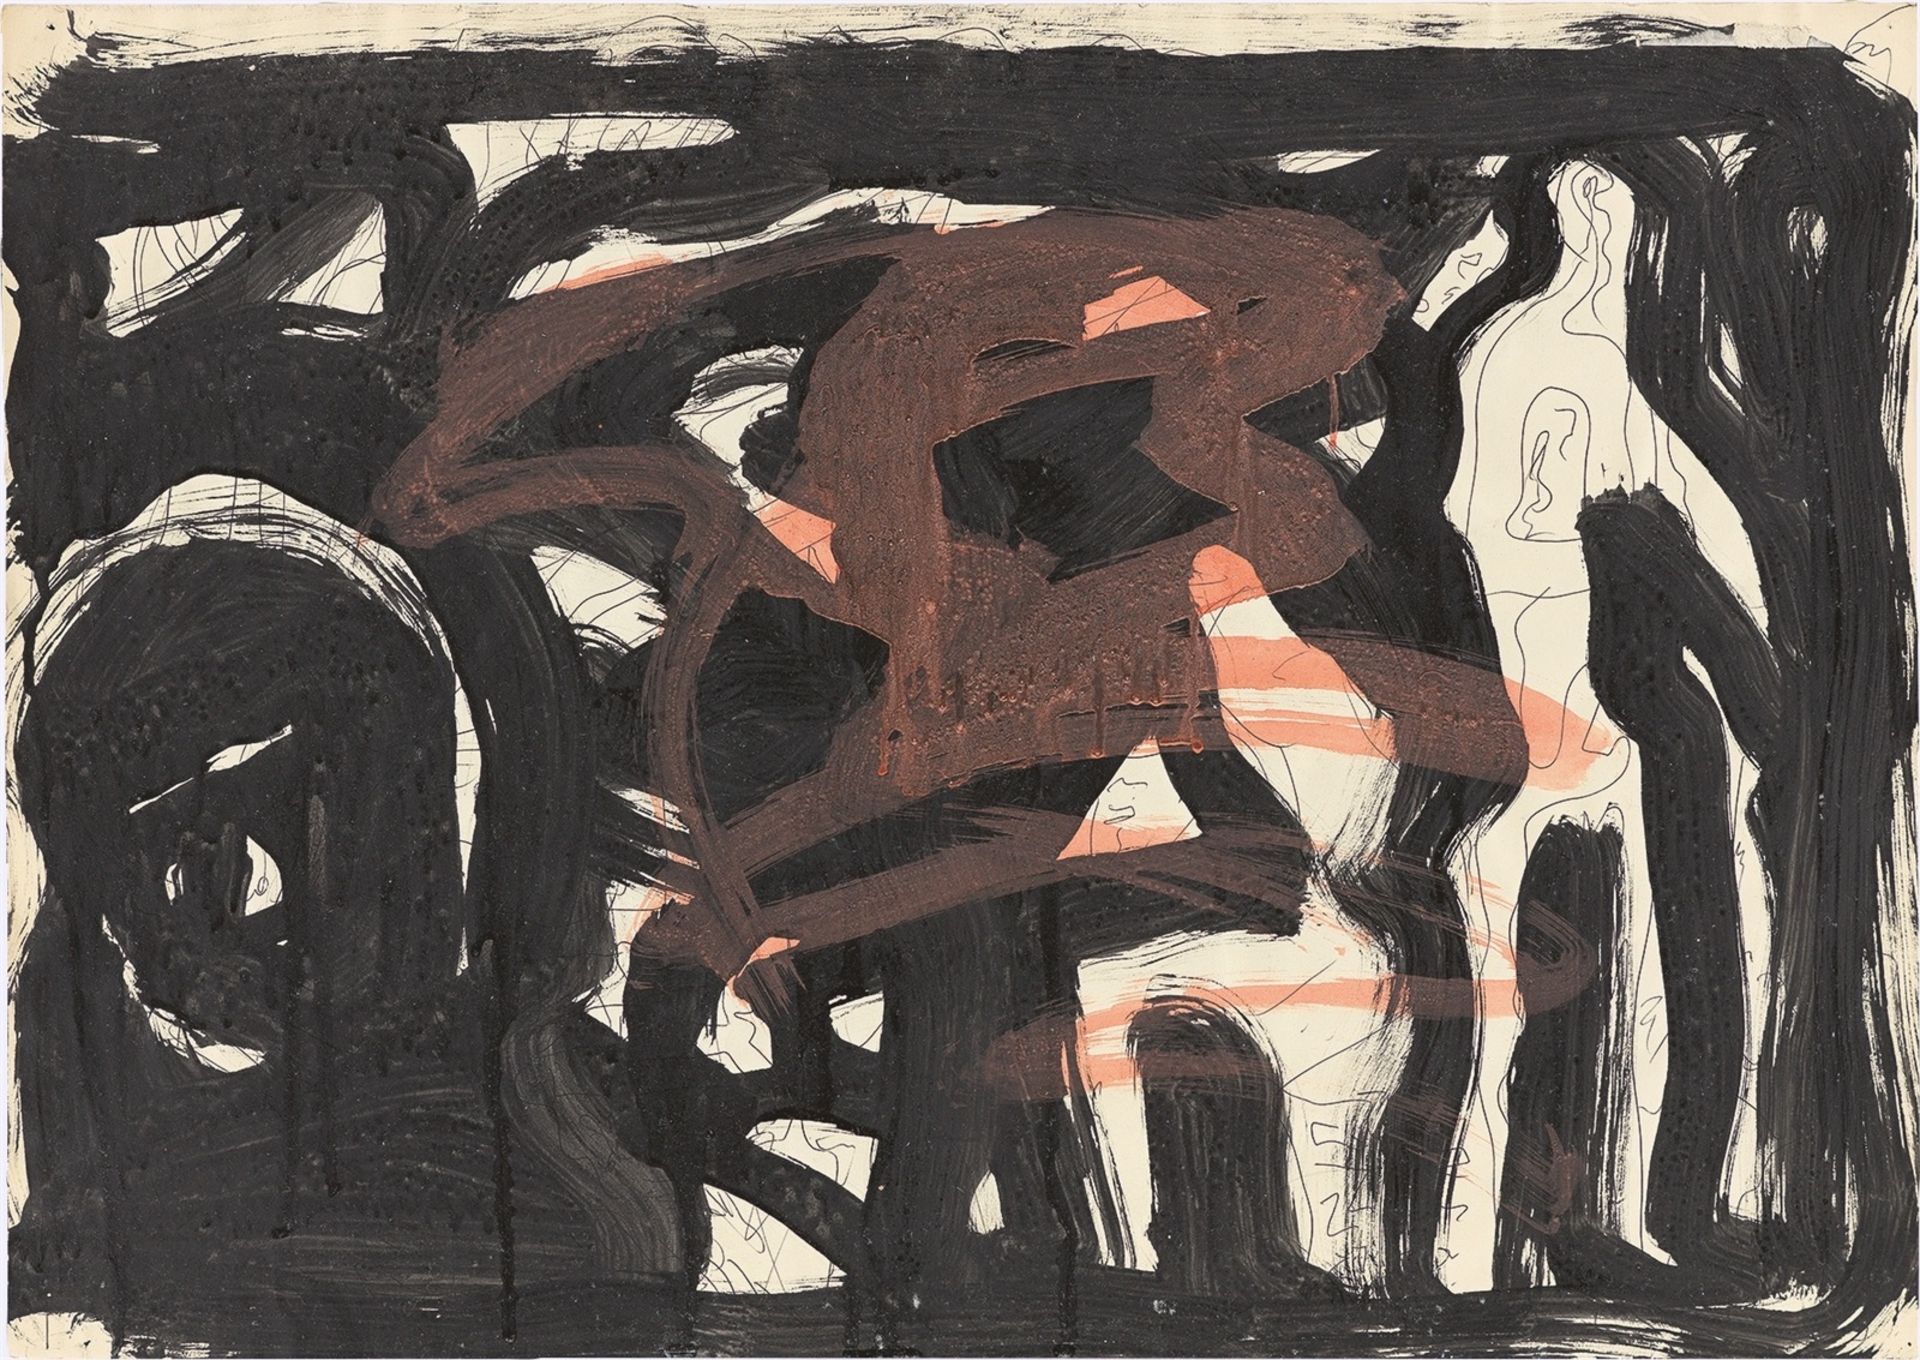 A.R. Penck. Untitled. 1975/76 - Image 3 of 10